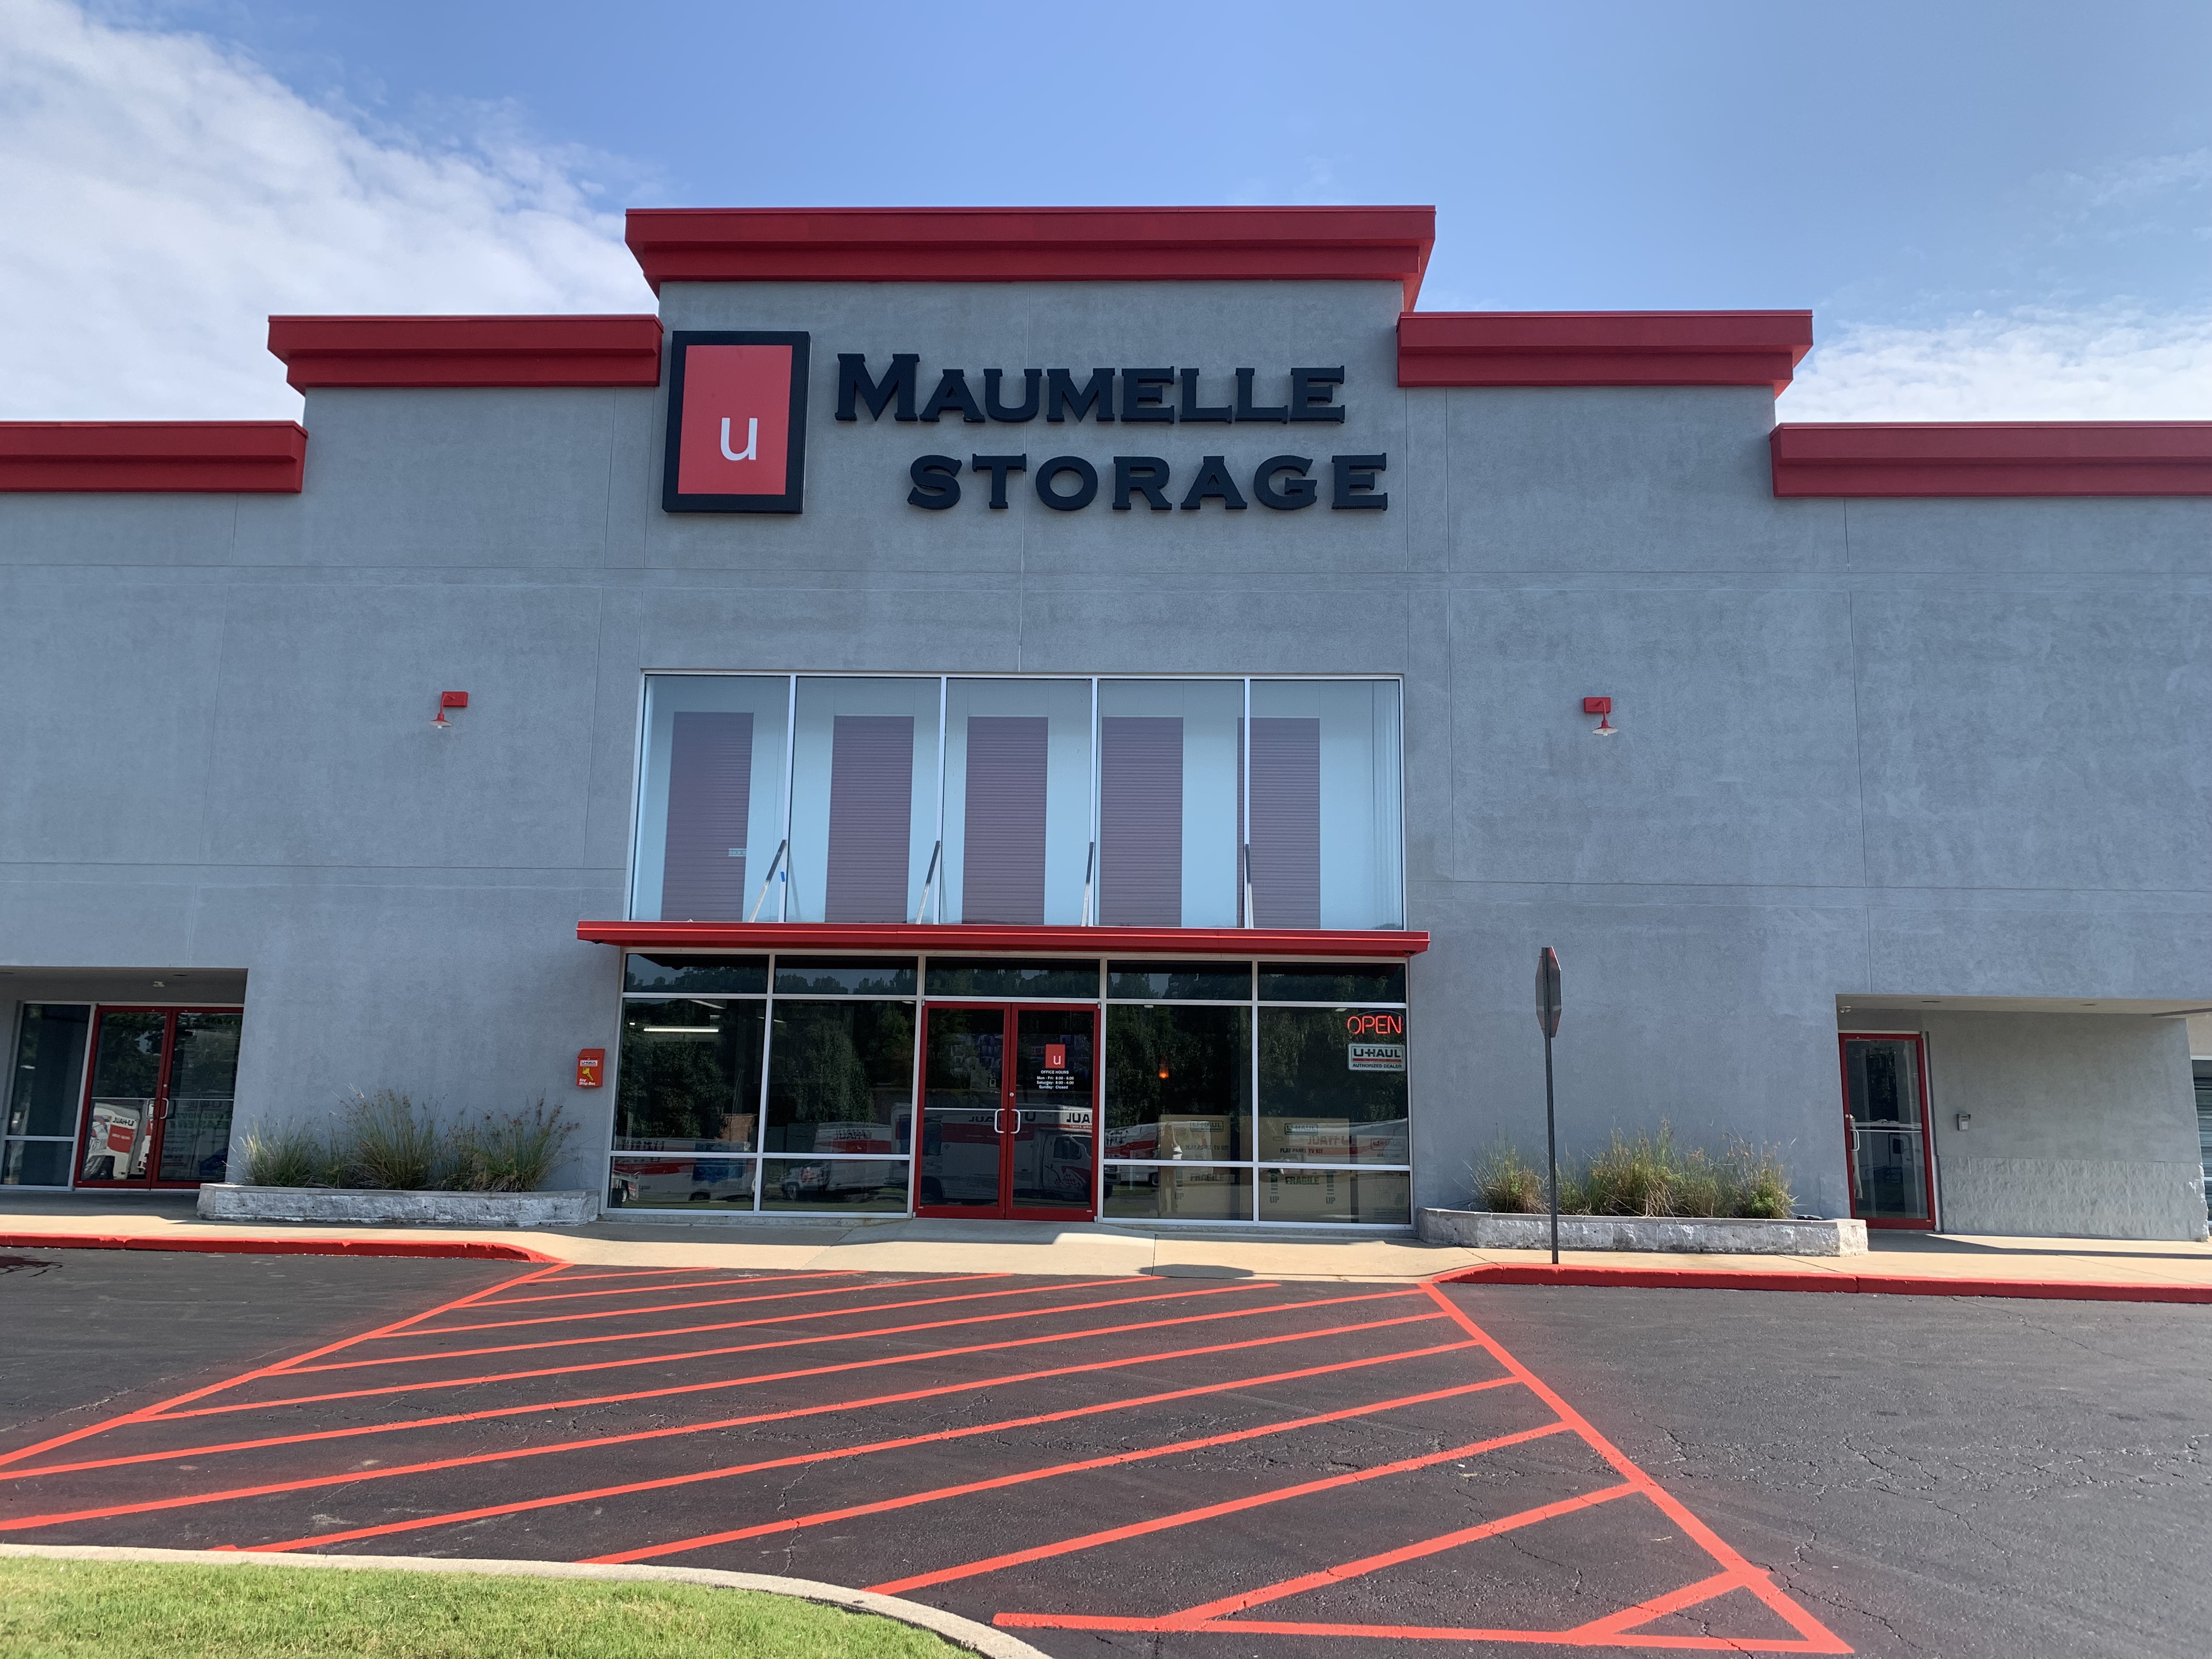 Maumelle U Storage in Maumelle AR